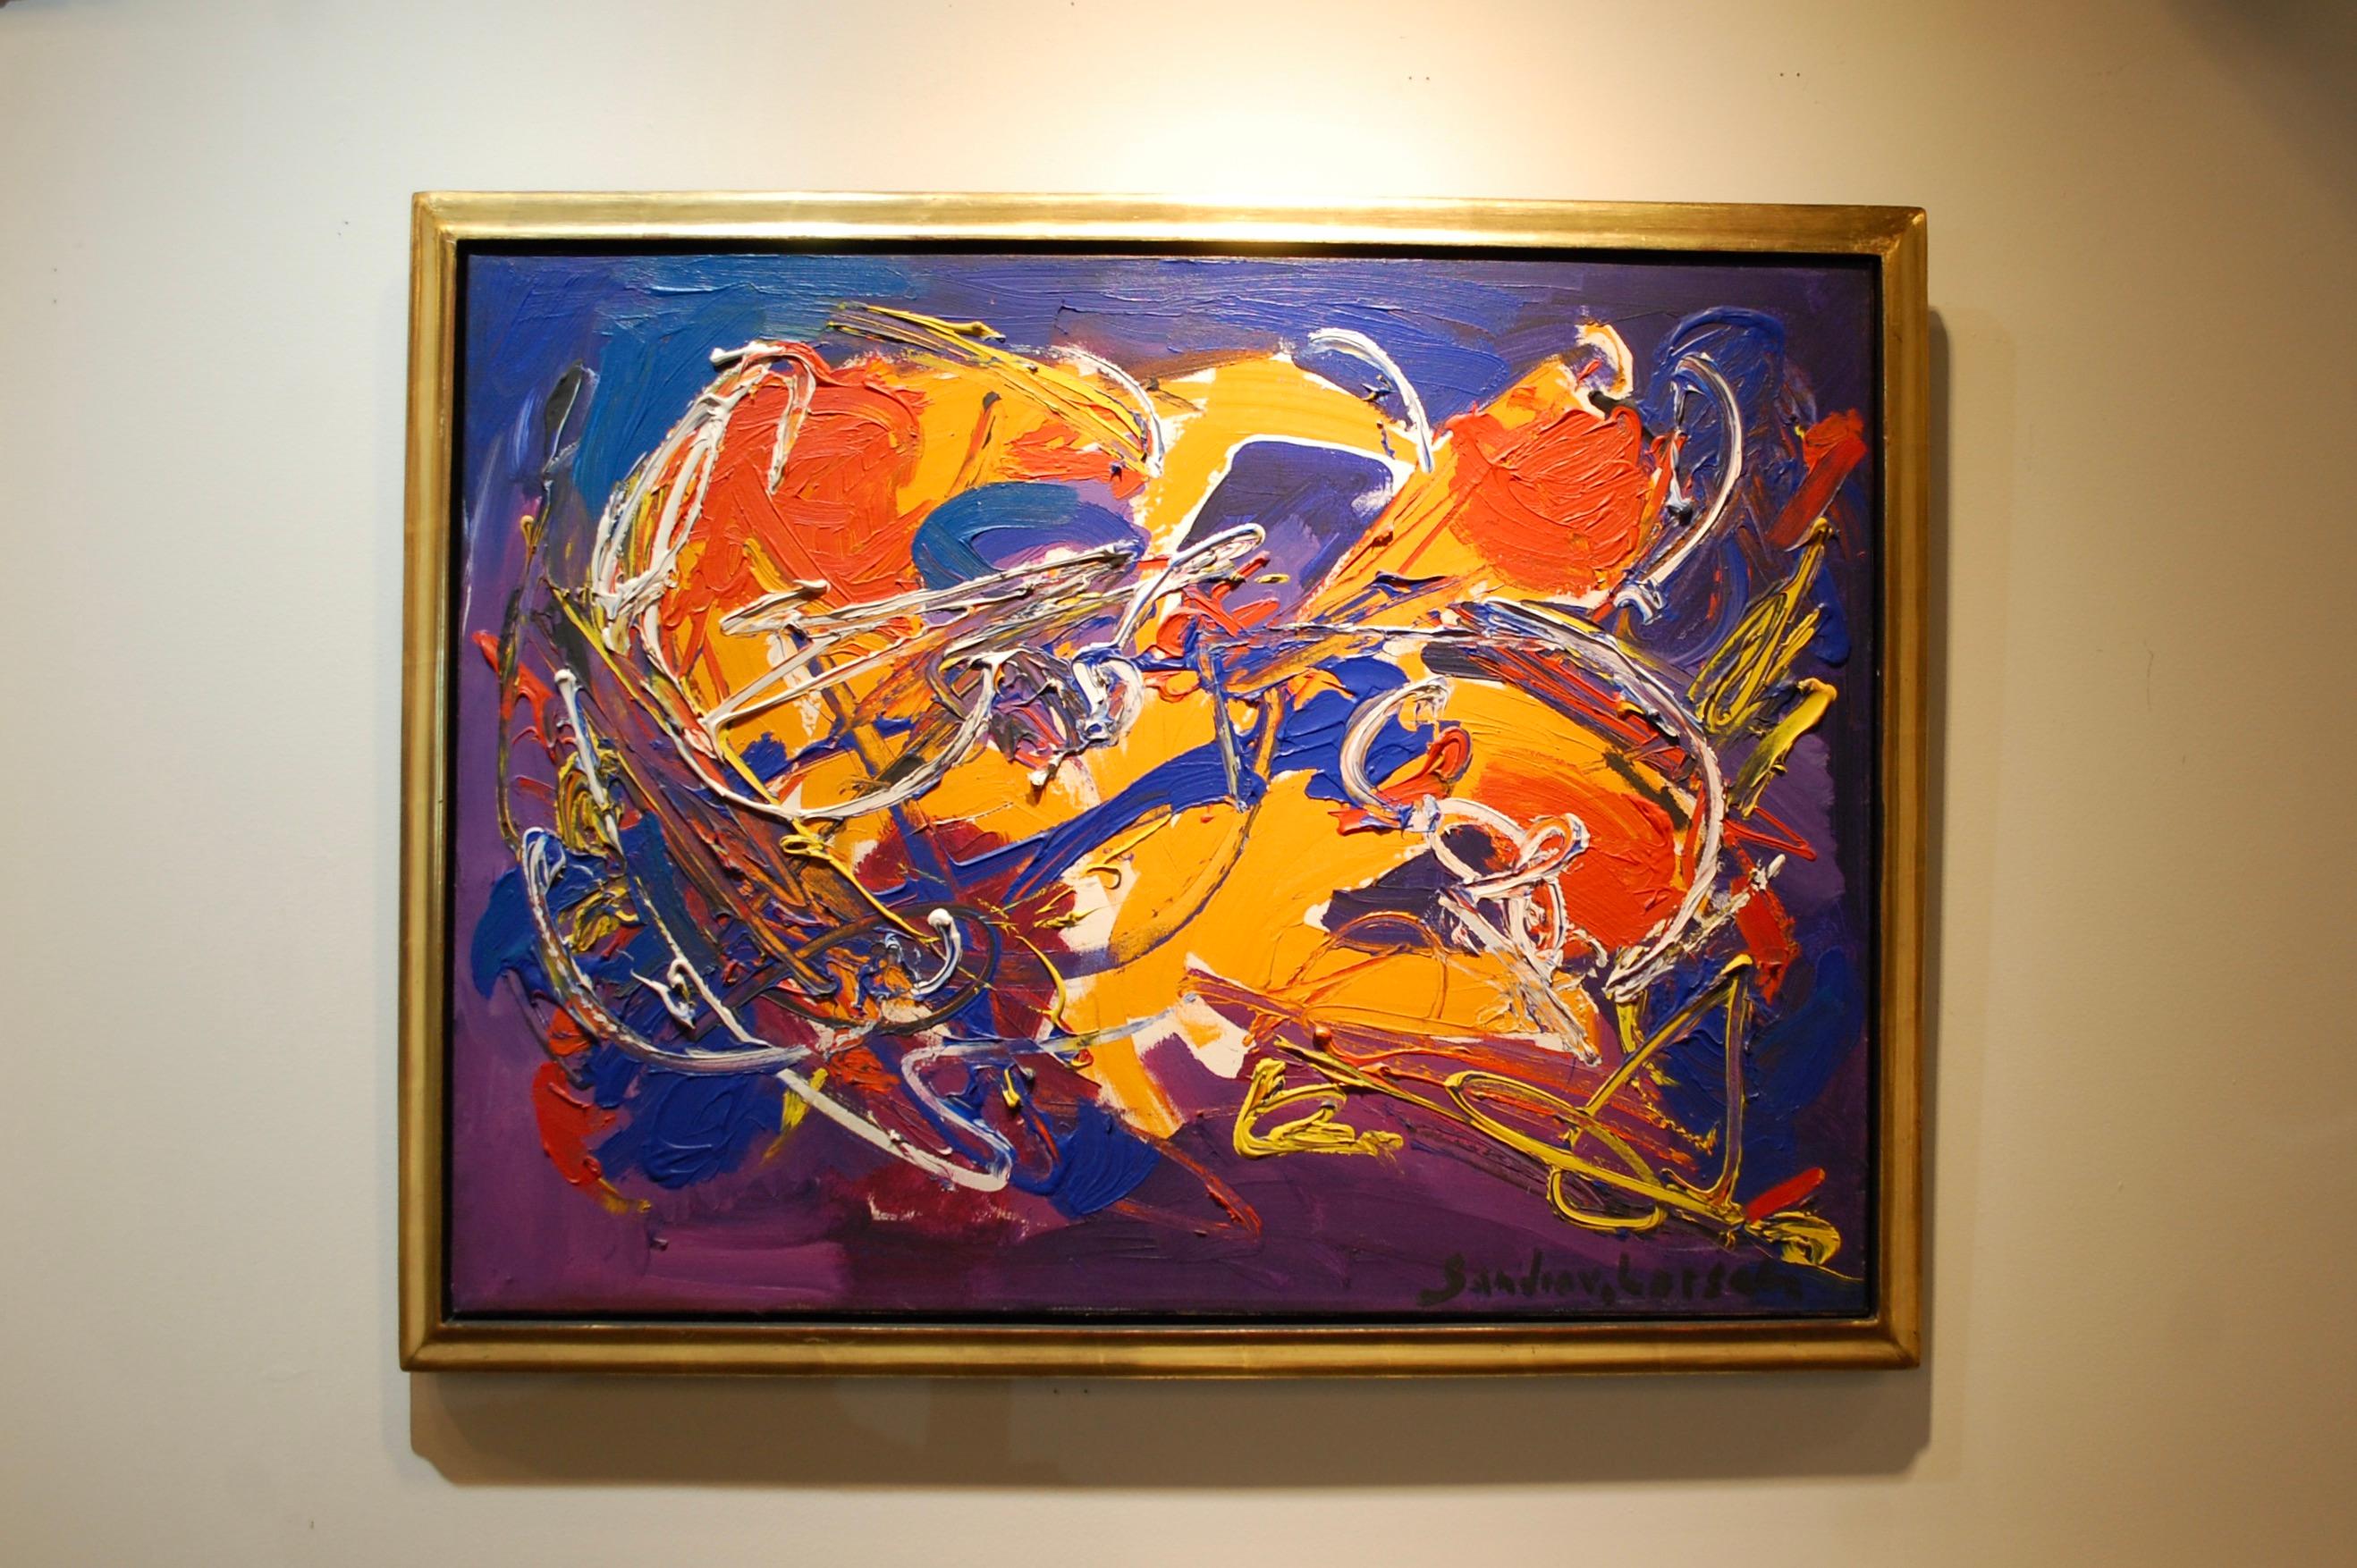  Abstract Expressionist With Orange and Blue Colors  - Gray Abstract Painting by Sandro von Lorsch